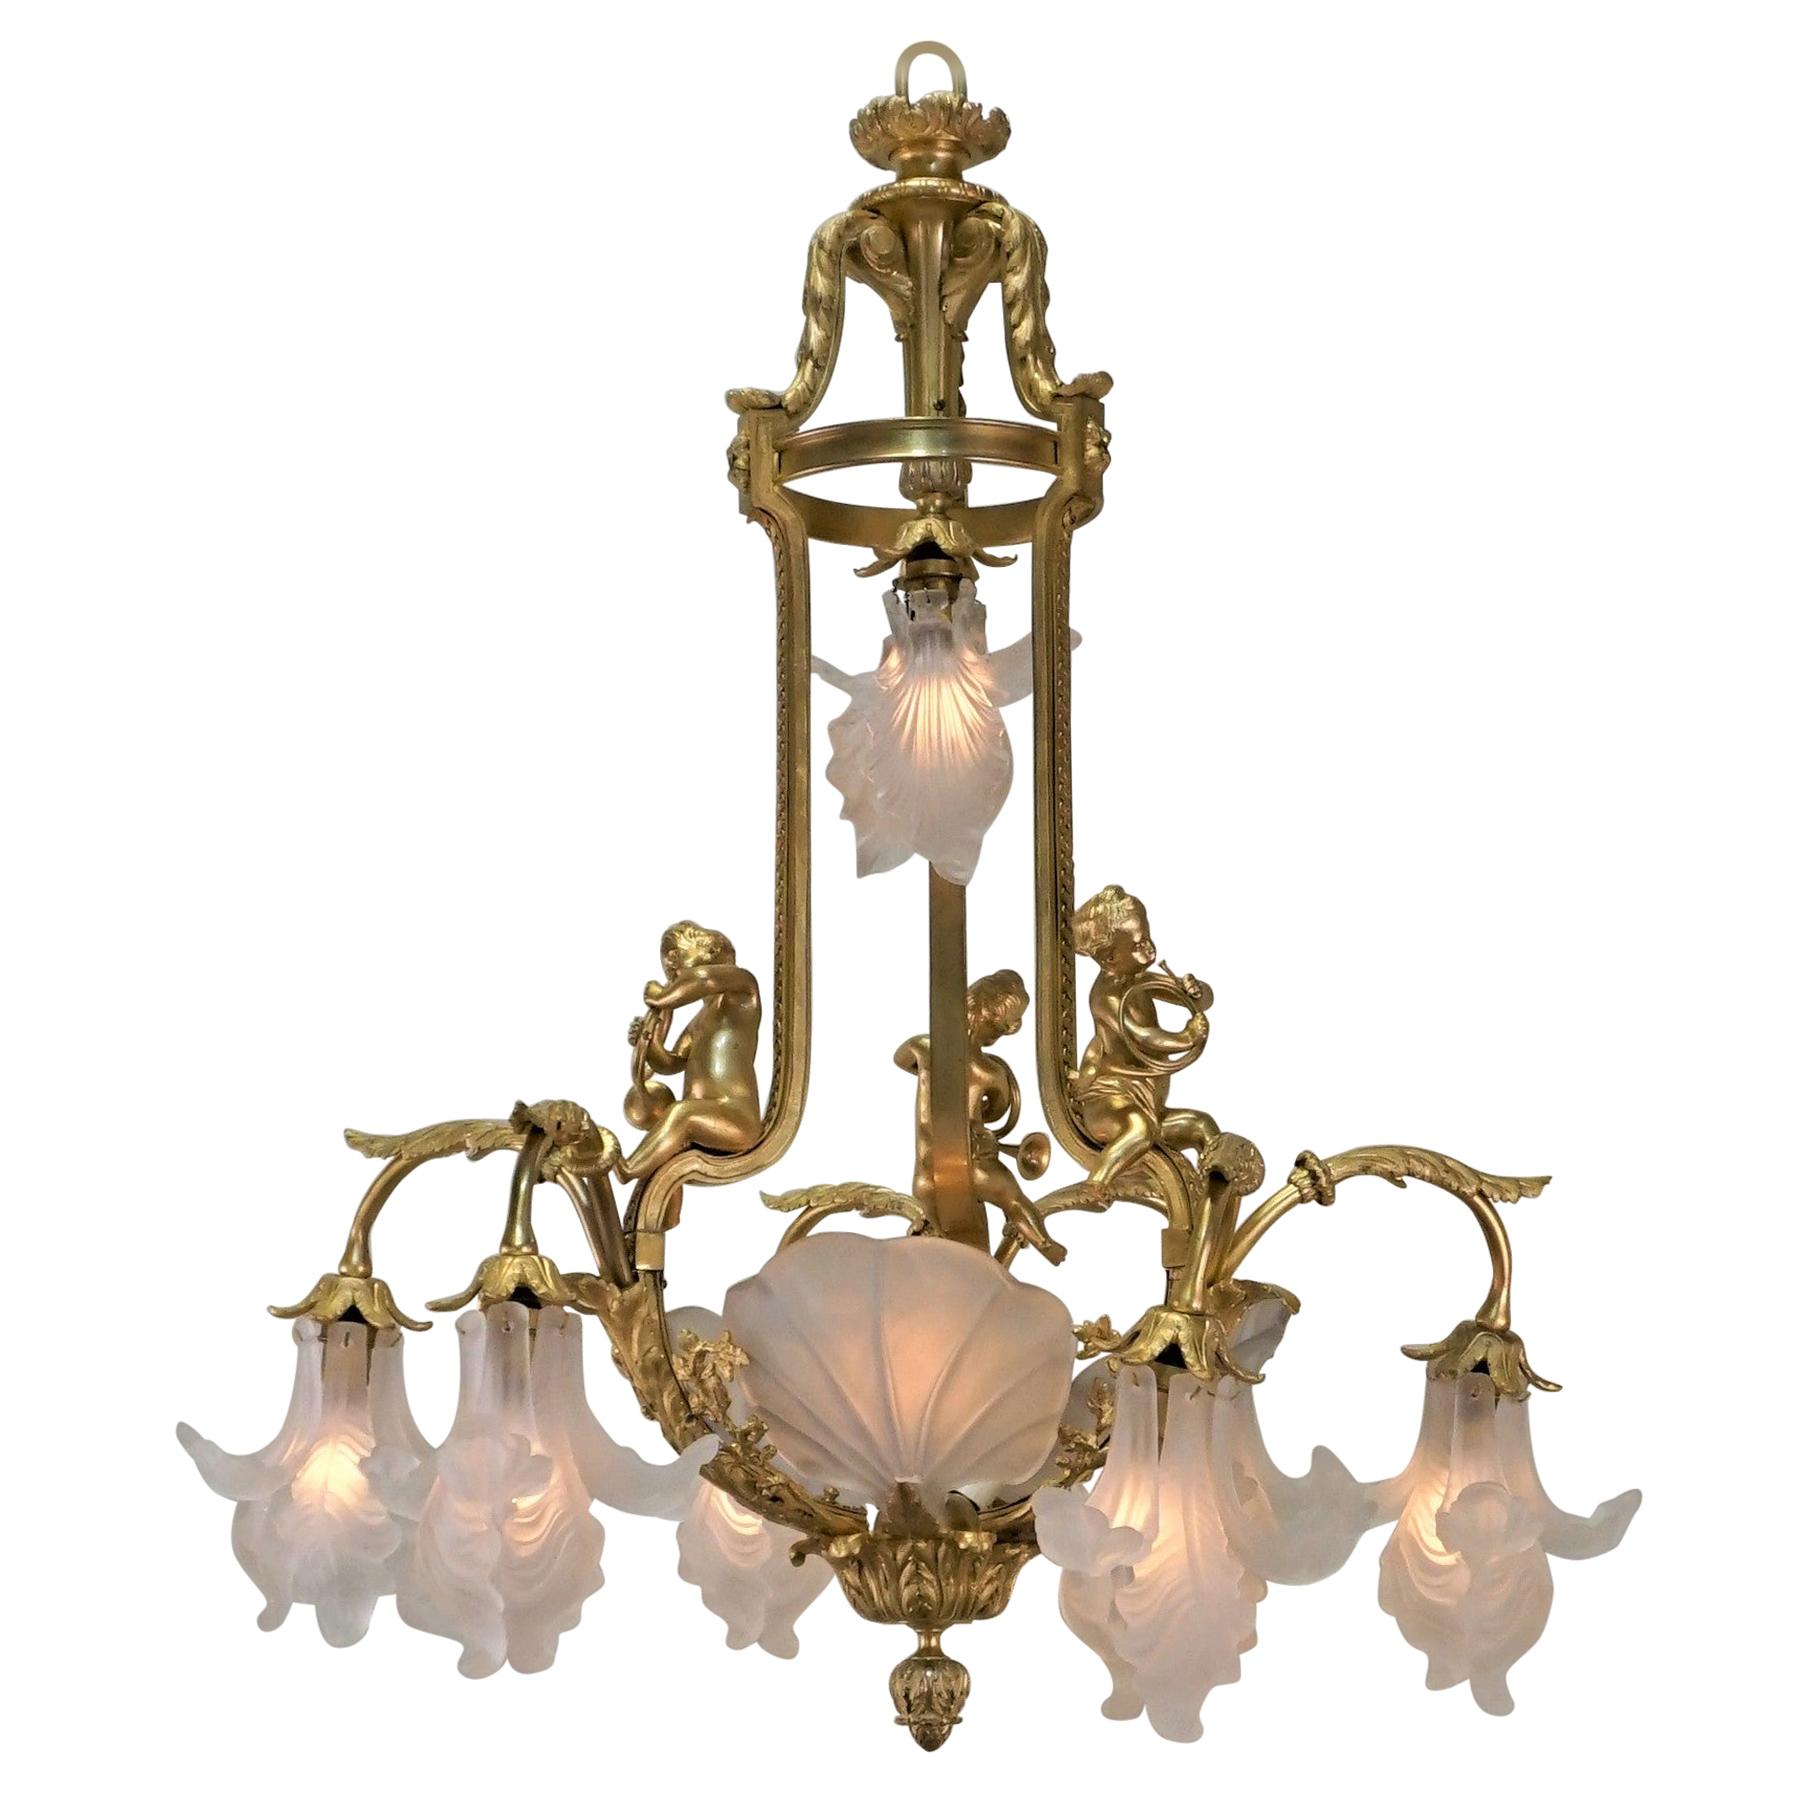 Important French Gilt Bronze Chandelier, Early 20th Century by E. Mottheau